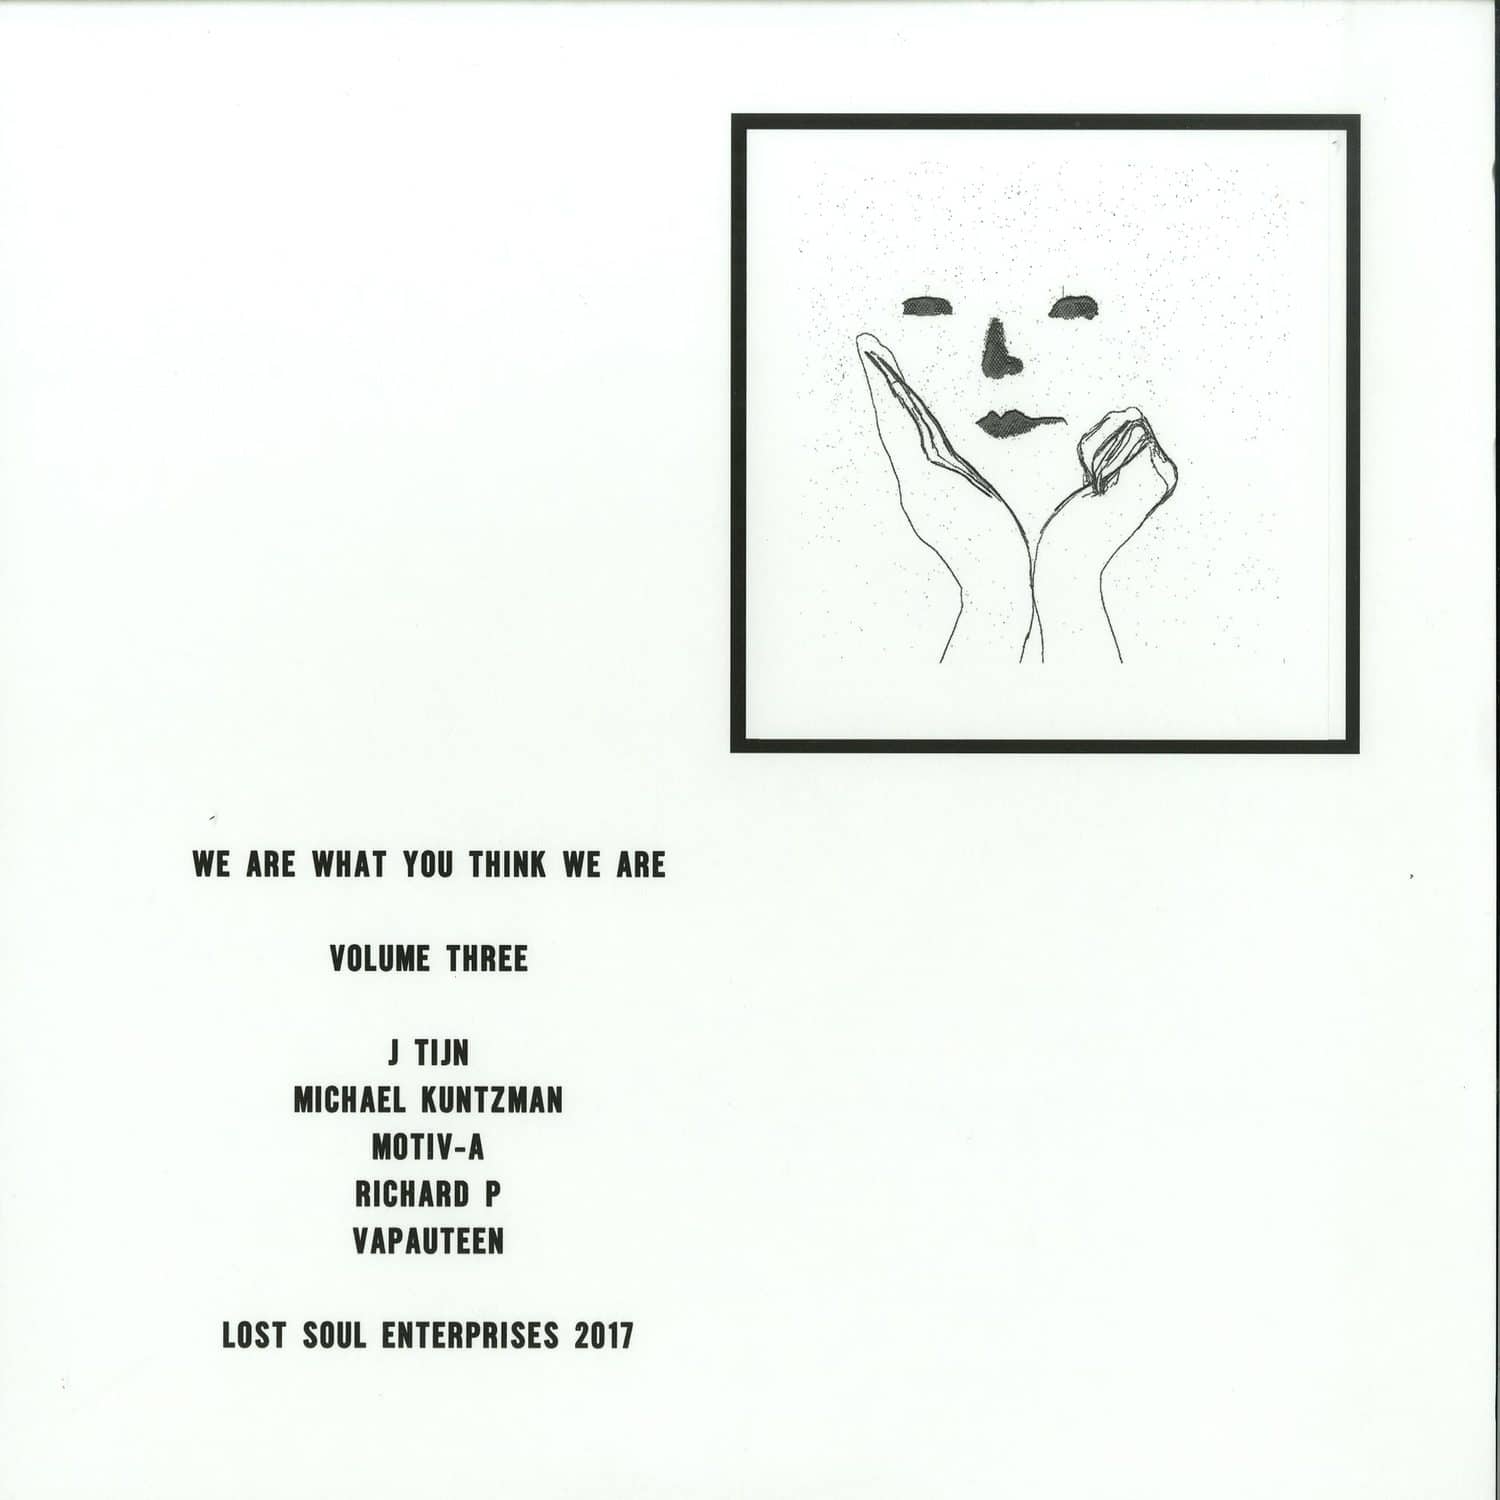 J Tijn / Richard P / Michael Kuntzman & more - WE ARE WHAT YOU THINK WE ARE